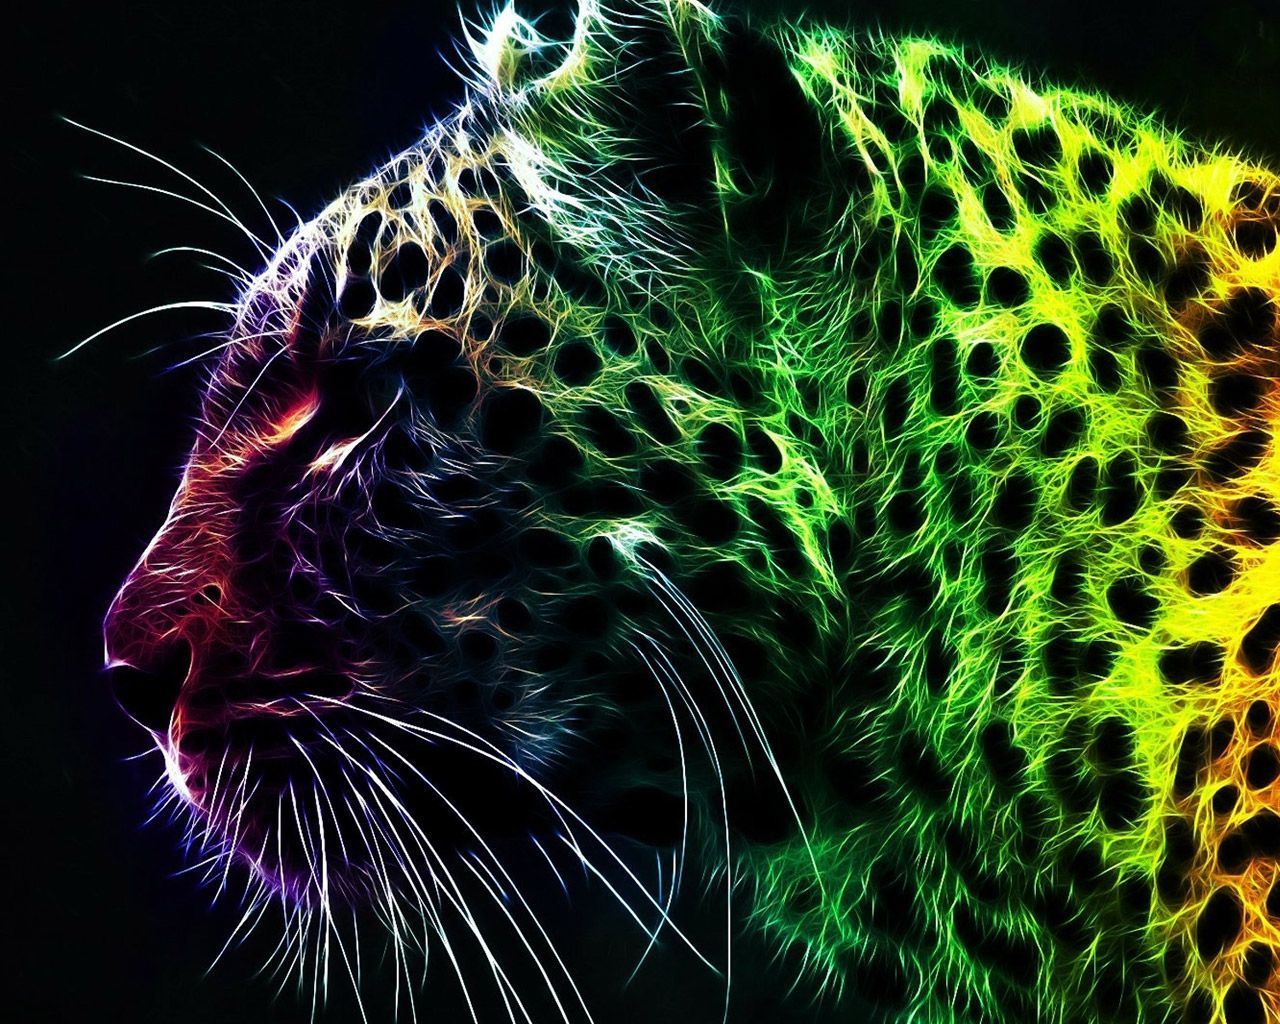 Awesome cheetah 3D Free HD Wallpapers for Desktop Get Latest